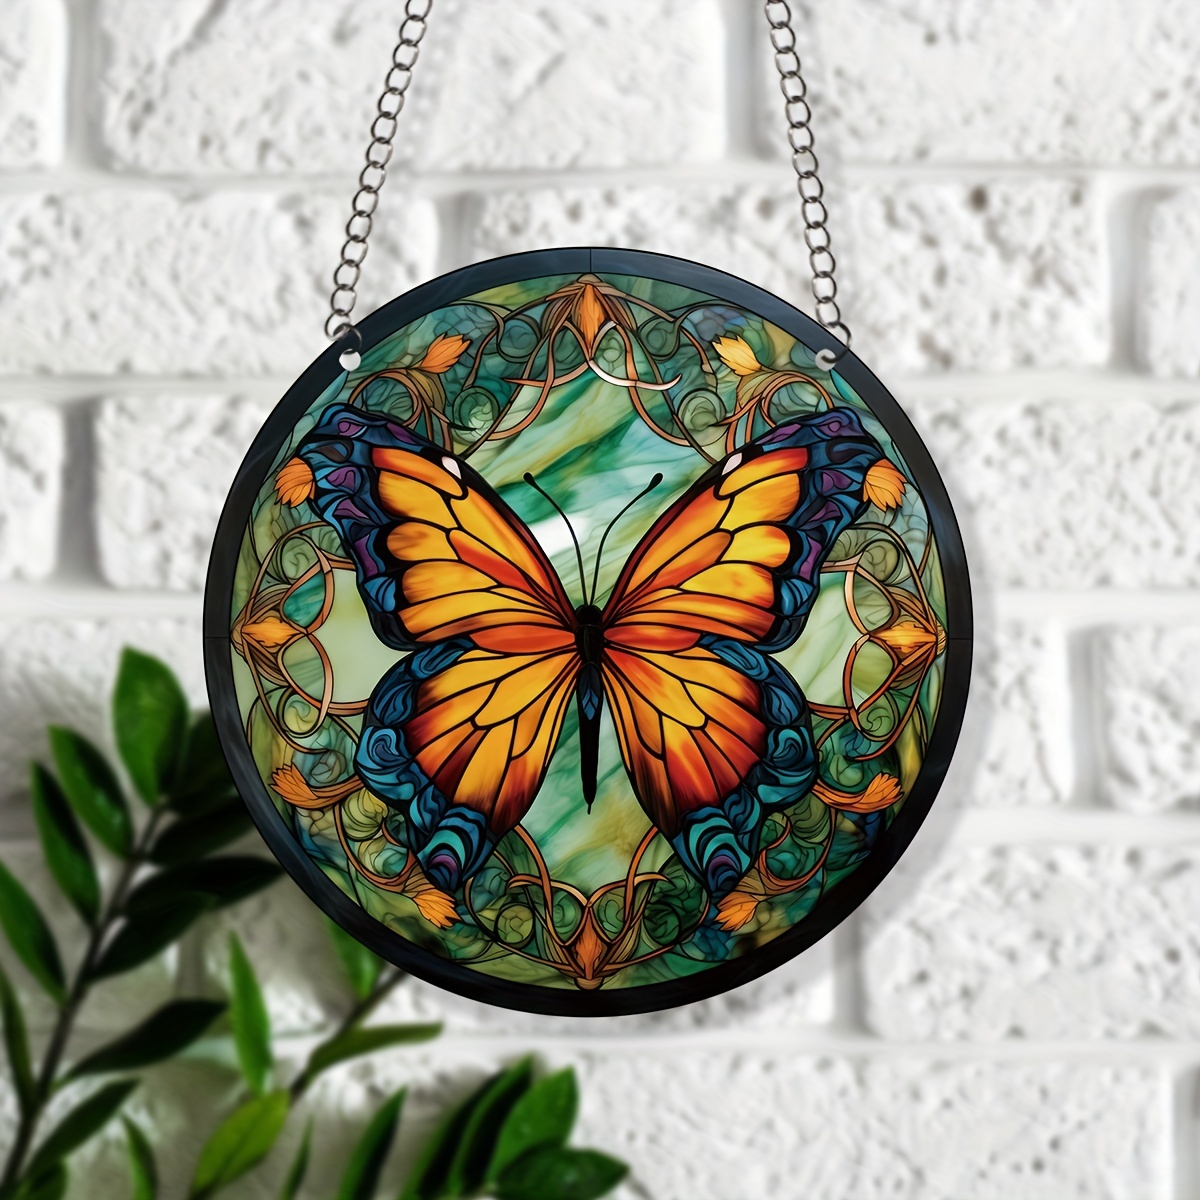 3D Metal Monarch Butterfly Wall Art, Stained Glass Hanging Butterfly Window  Craft Decorations